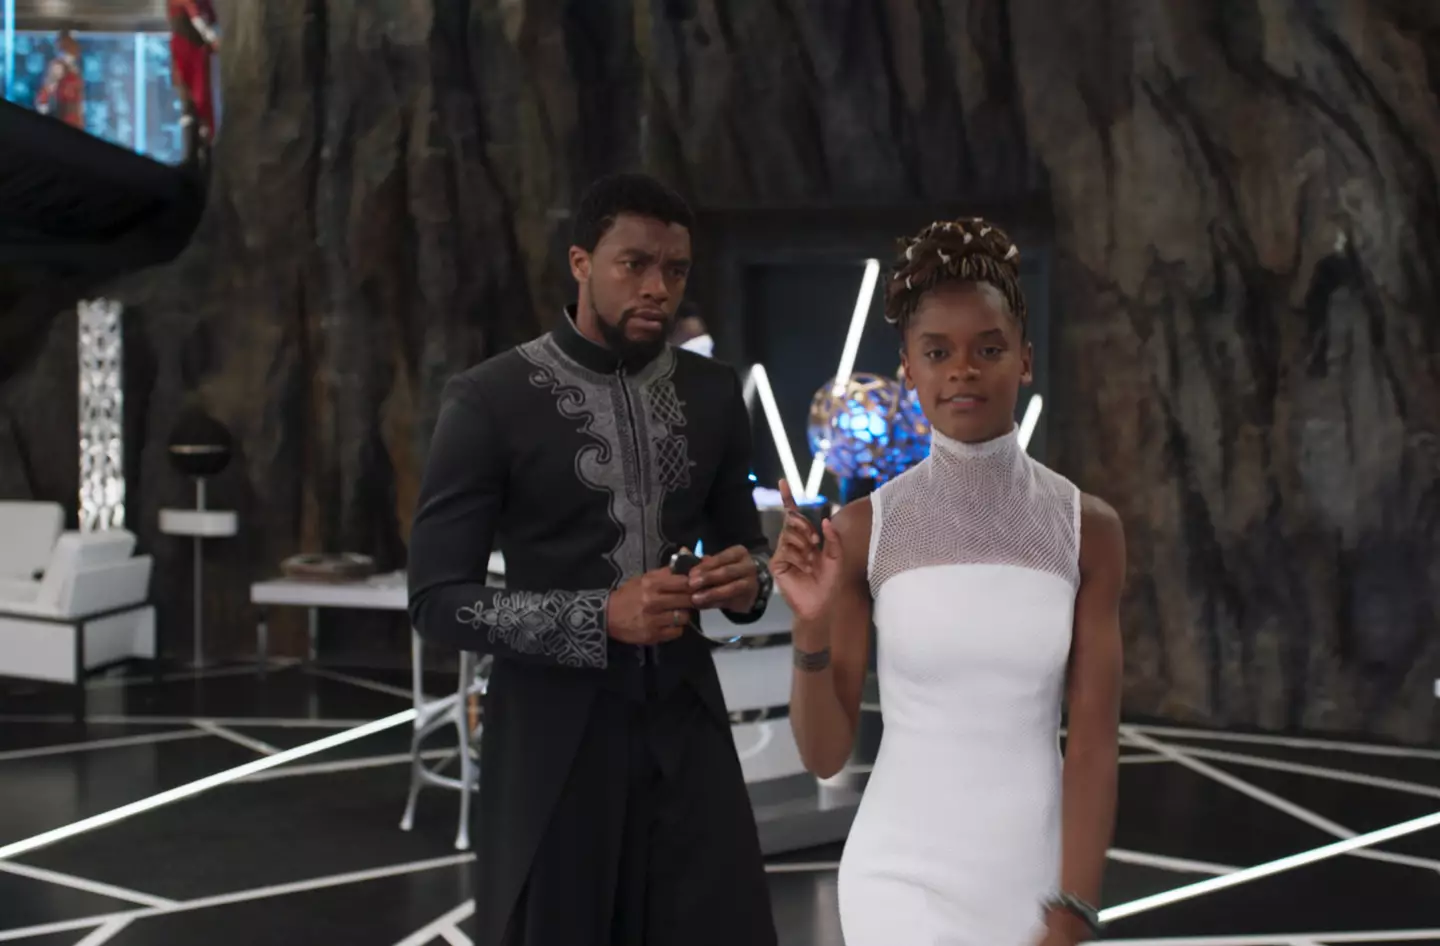 Black Panther star Chadwick Boseman tragically passed away in August 2020.